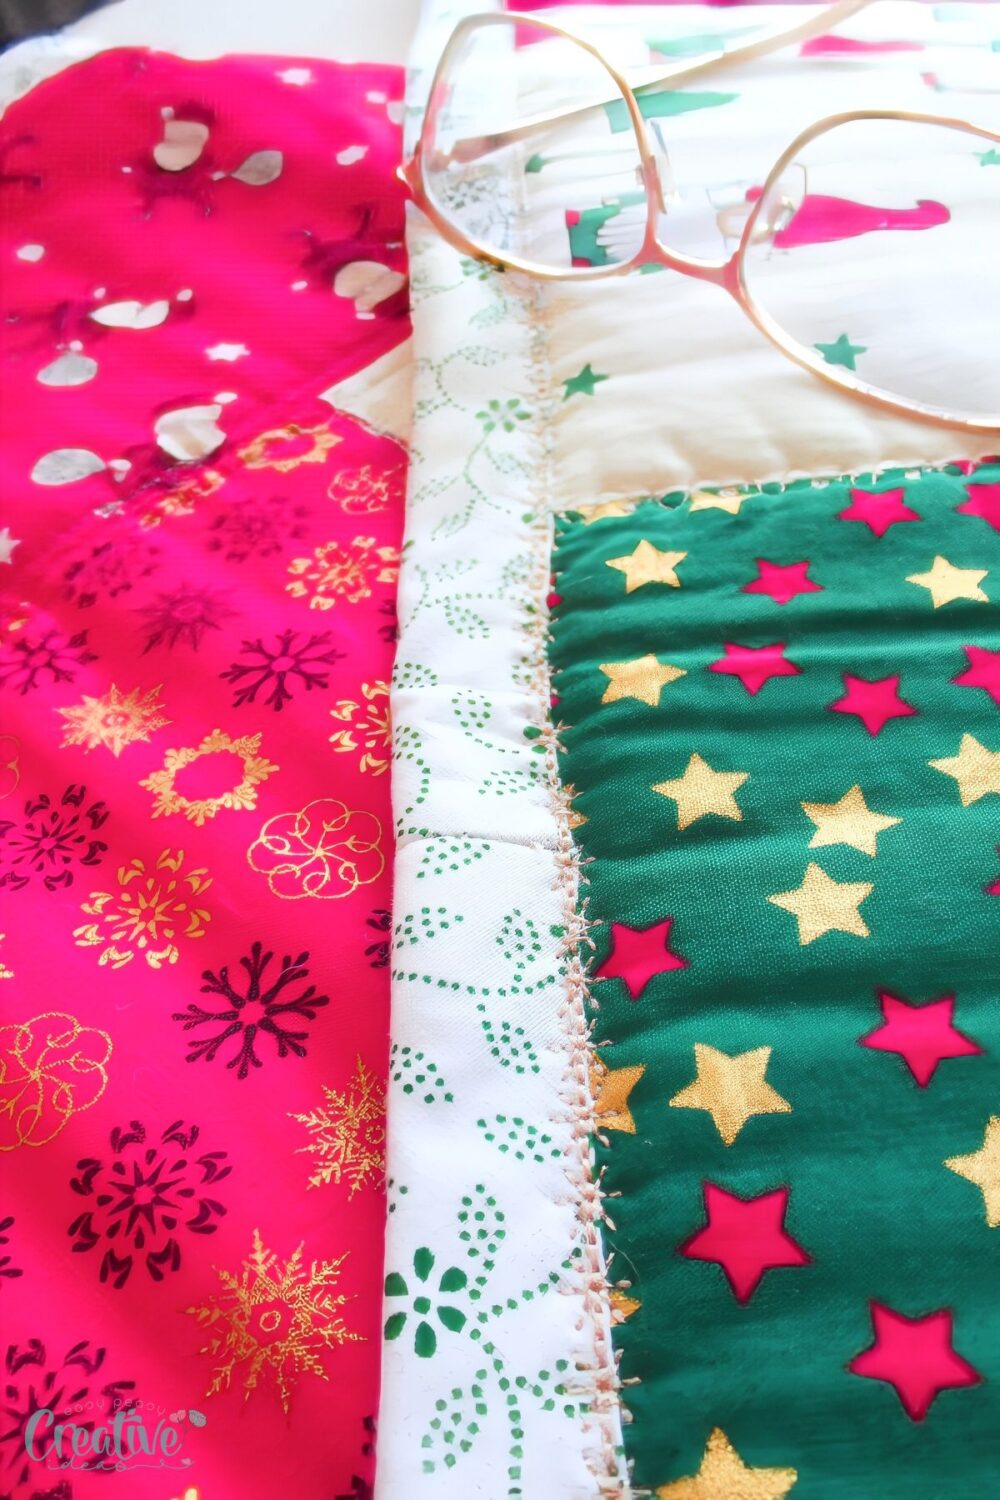 Discover the step-by-step guide to mastering the technique of joining bias binding on a quilt and achieve beautifully finished edges with these valuable sewing tips.